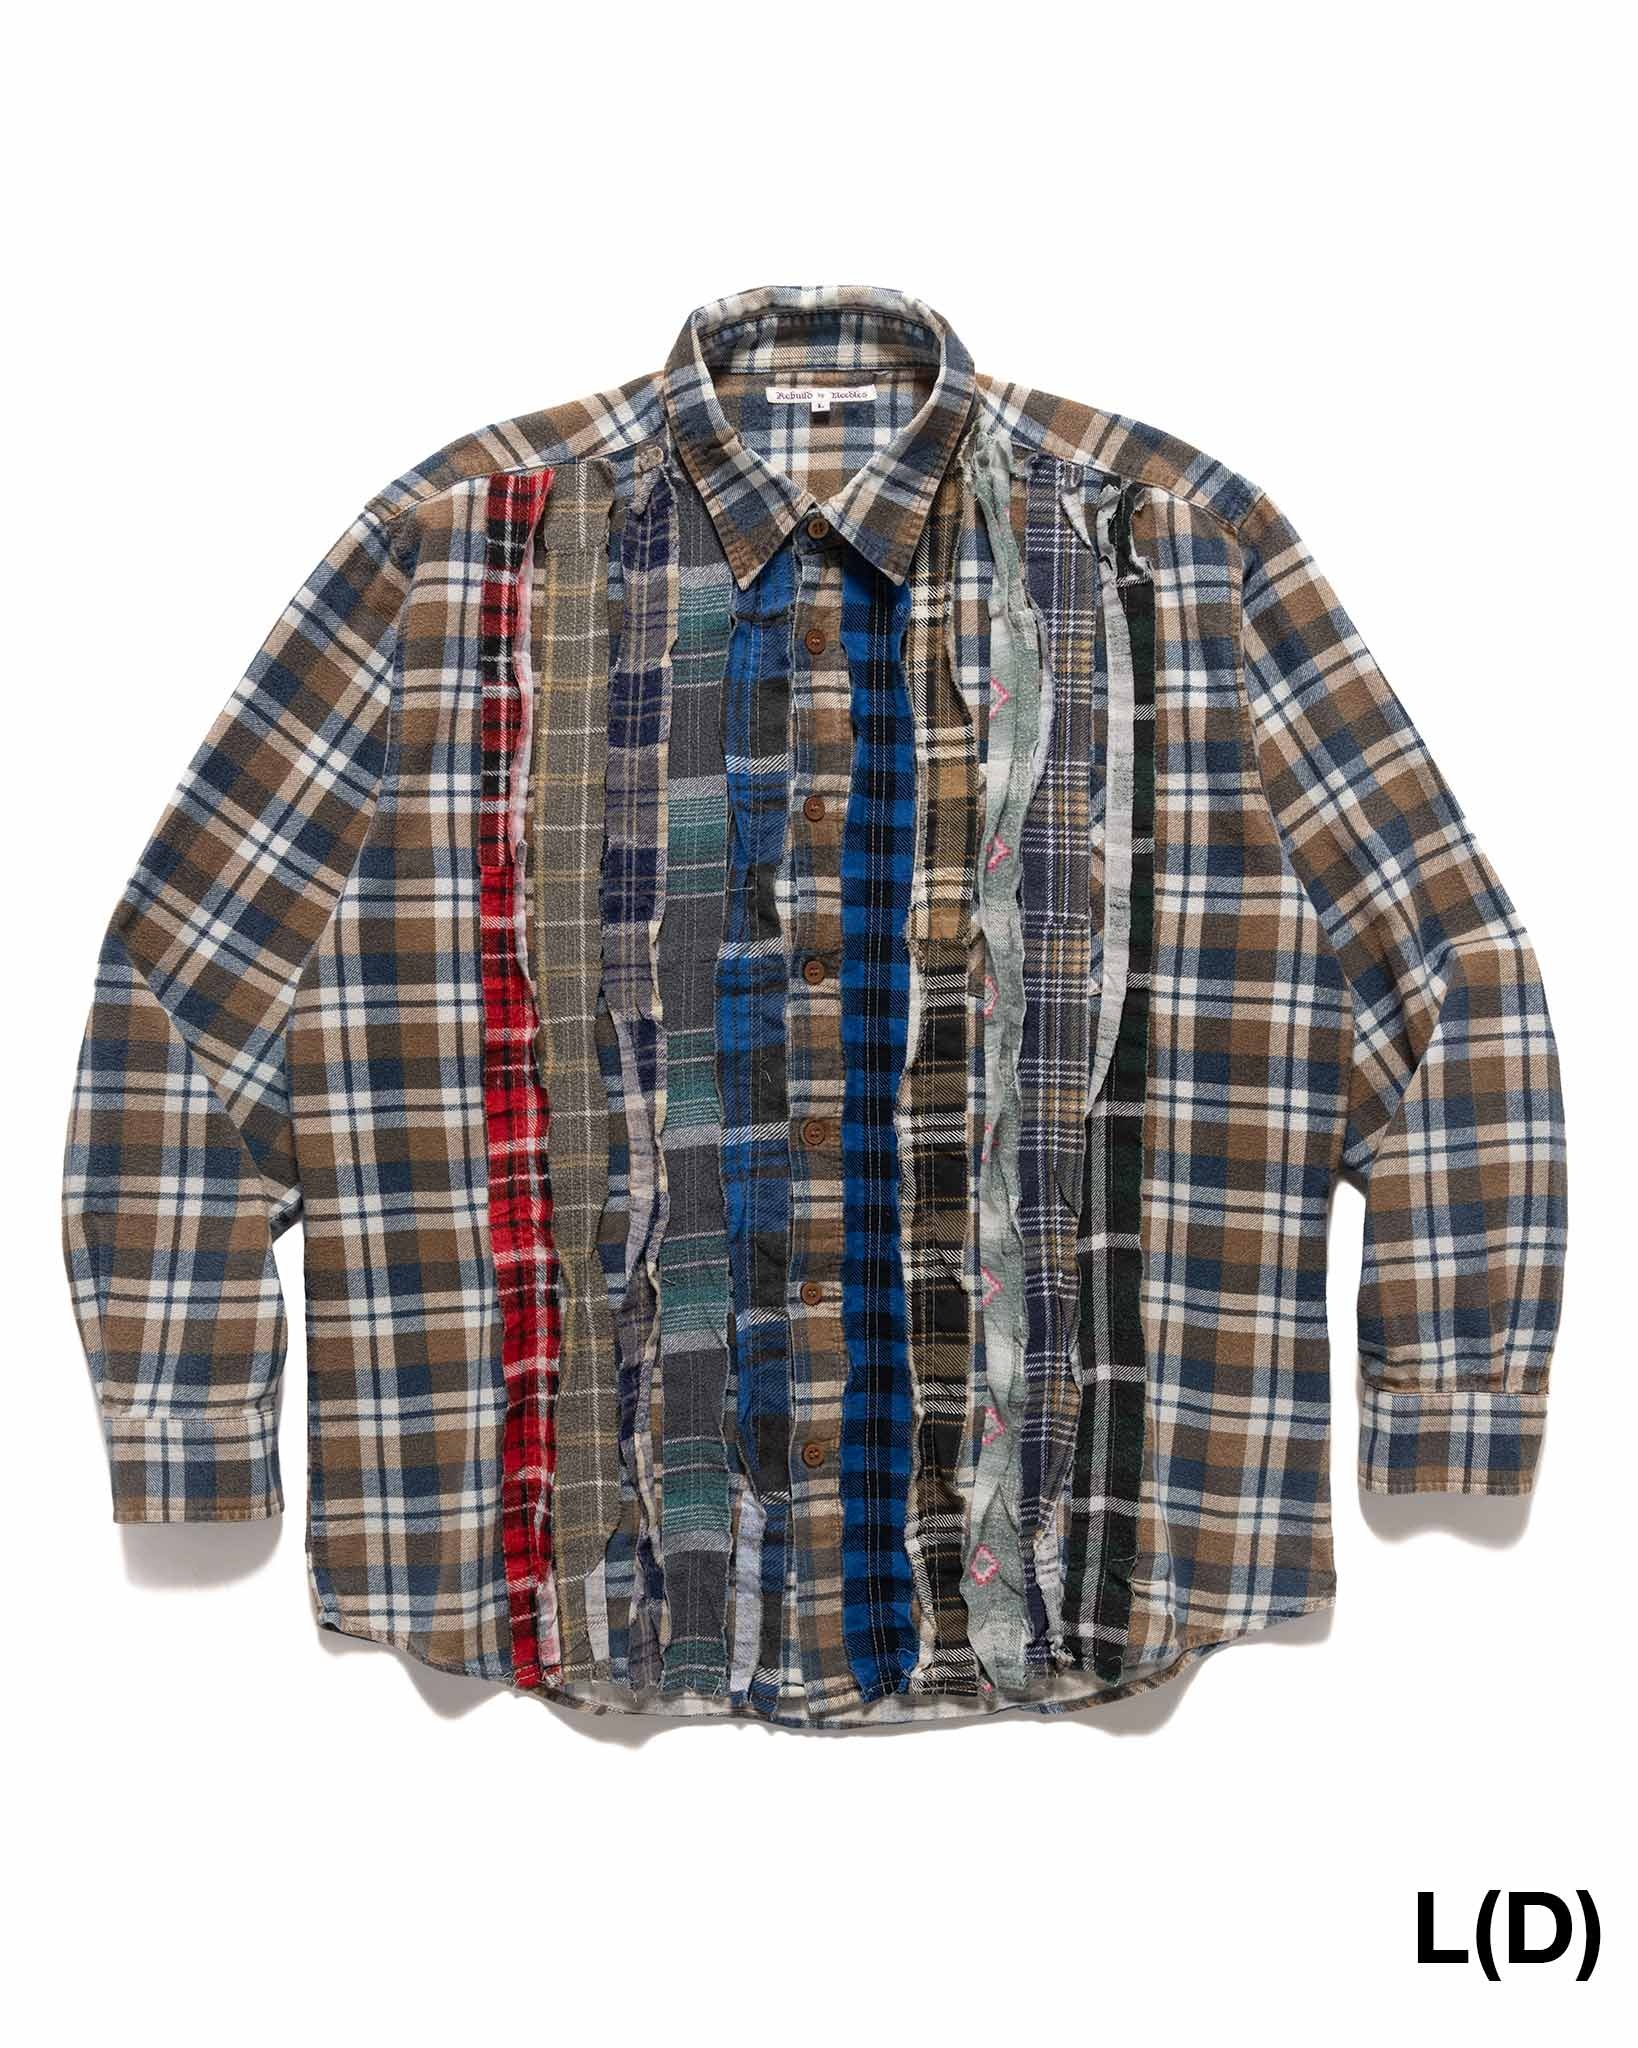 Rebuild by Needles Flannel Shirt -> Ribbon Shirt Assorted - 16